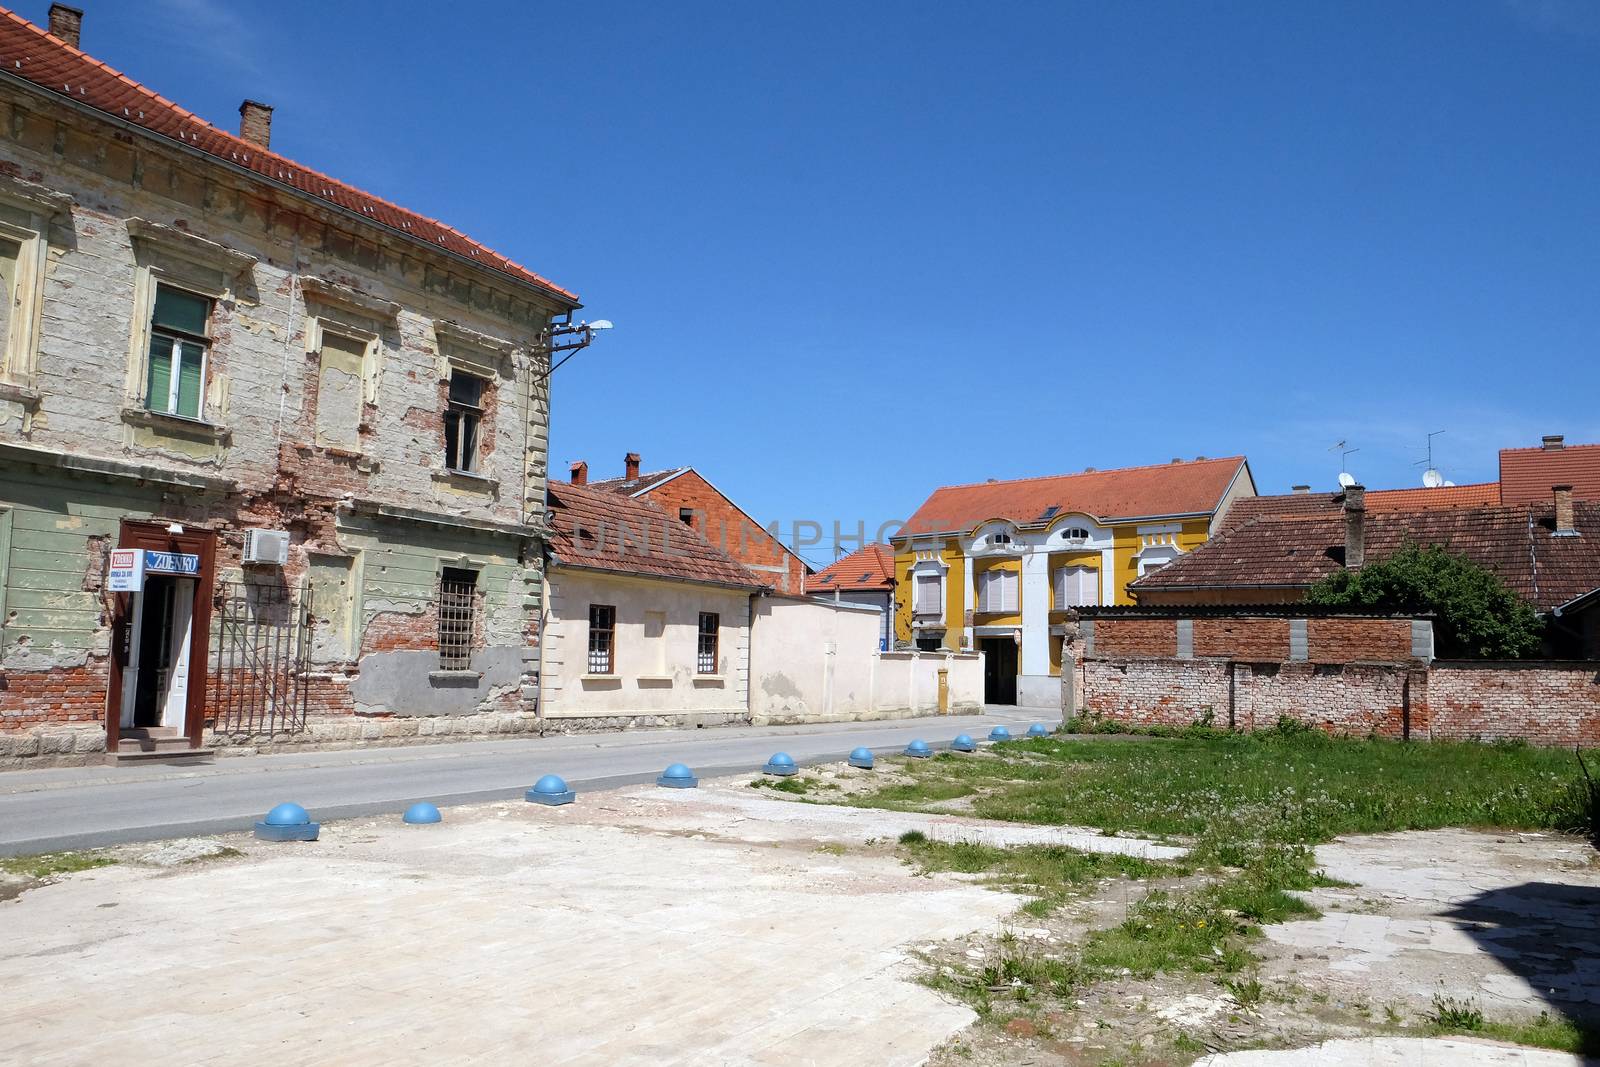 Destroyed house as war aftermath. The Croatian War of Independence was fought from 1991 to 1995 in Pakrac, Croatia